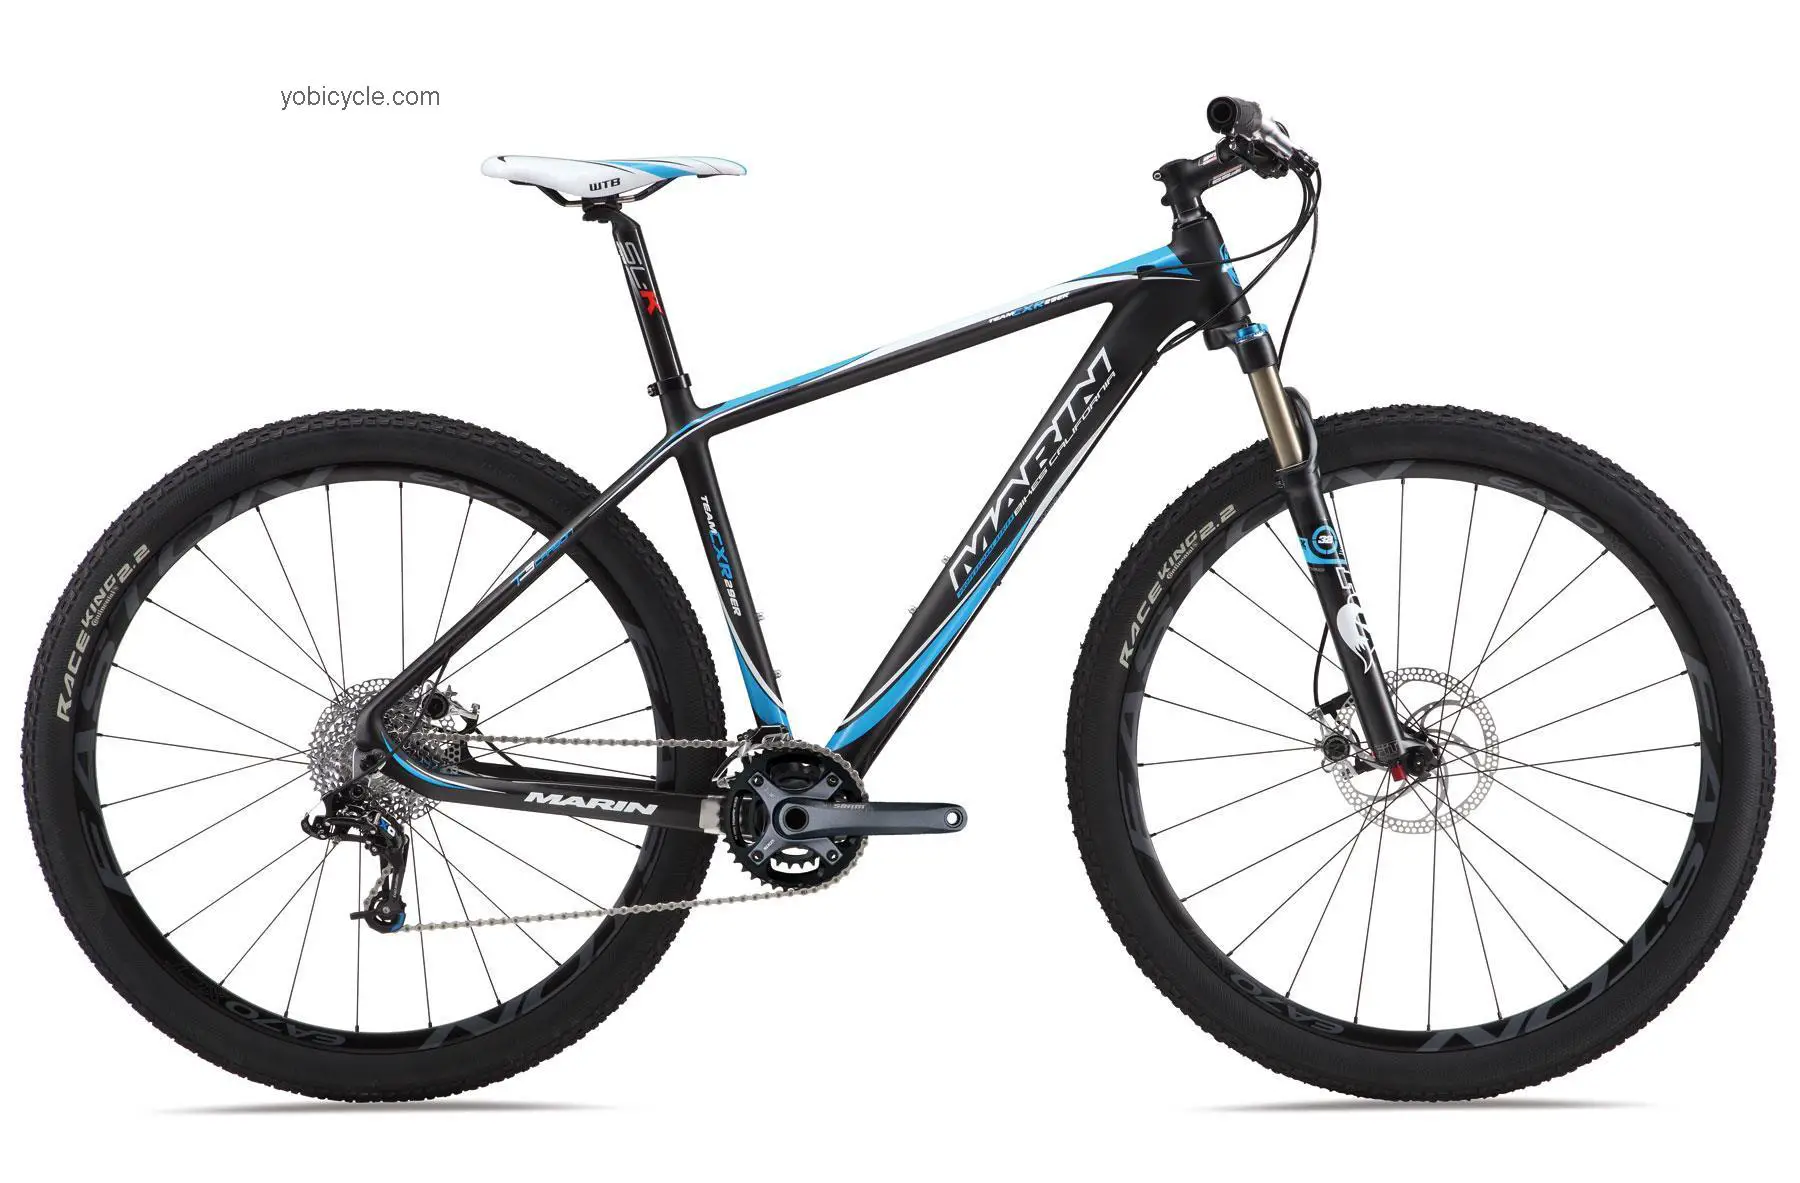 Marin Team CXR 29er Pro competitors and comparison tool online specs and performance